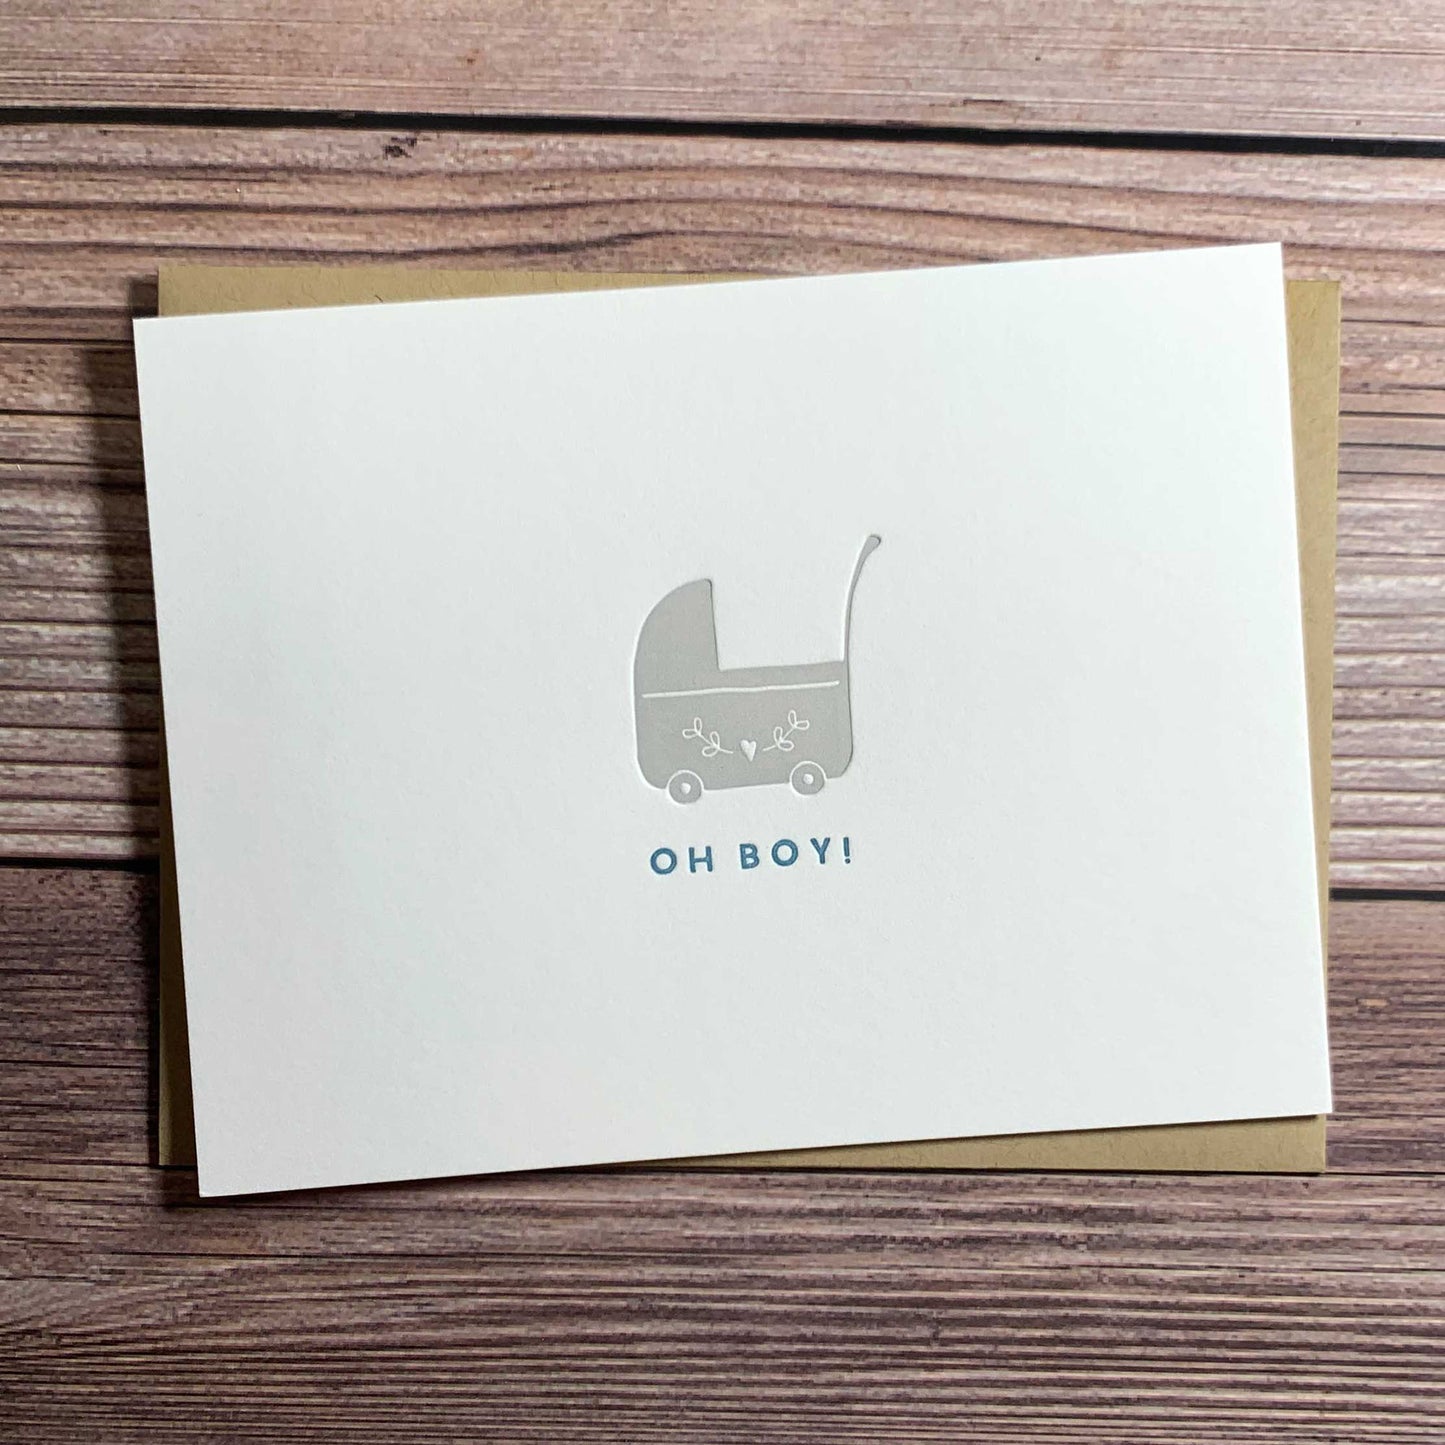 Oh Boy! new baby boy Card, Baby Shower card, Letterpress printed, includes envelope